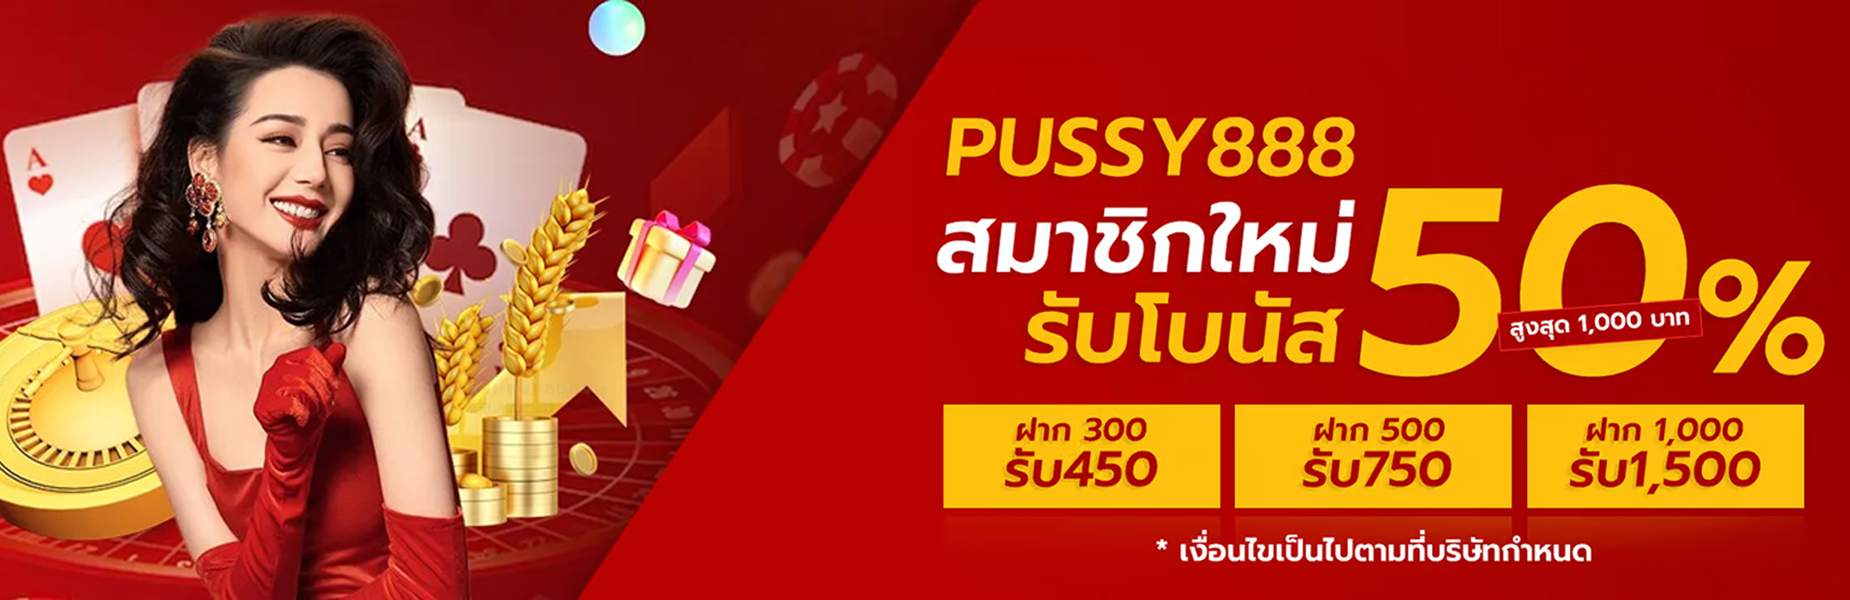 pussy888banner